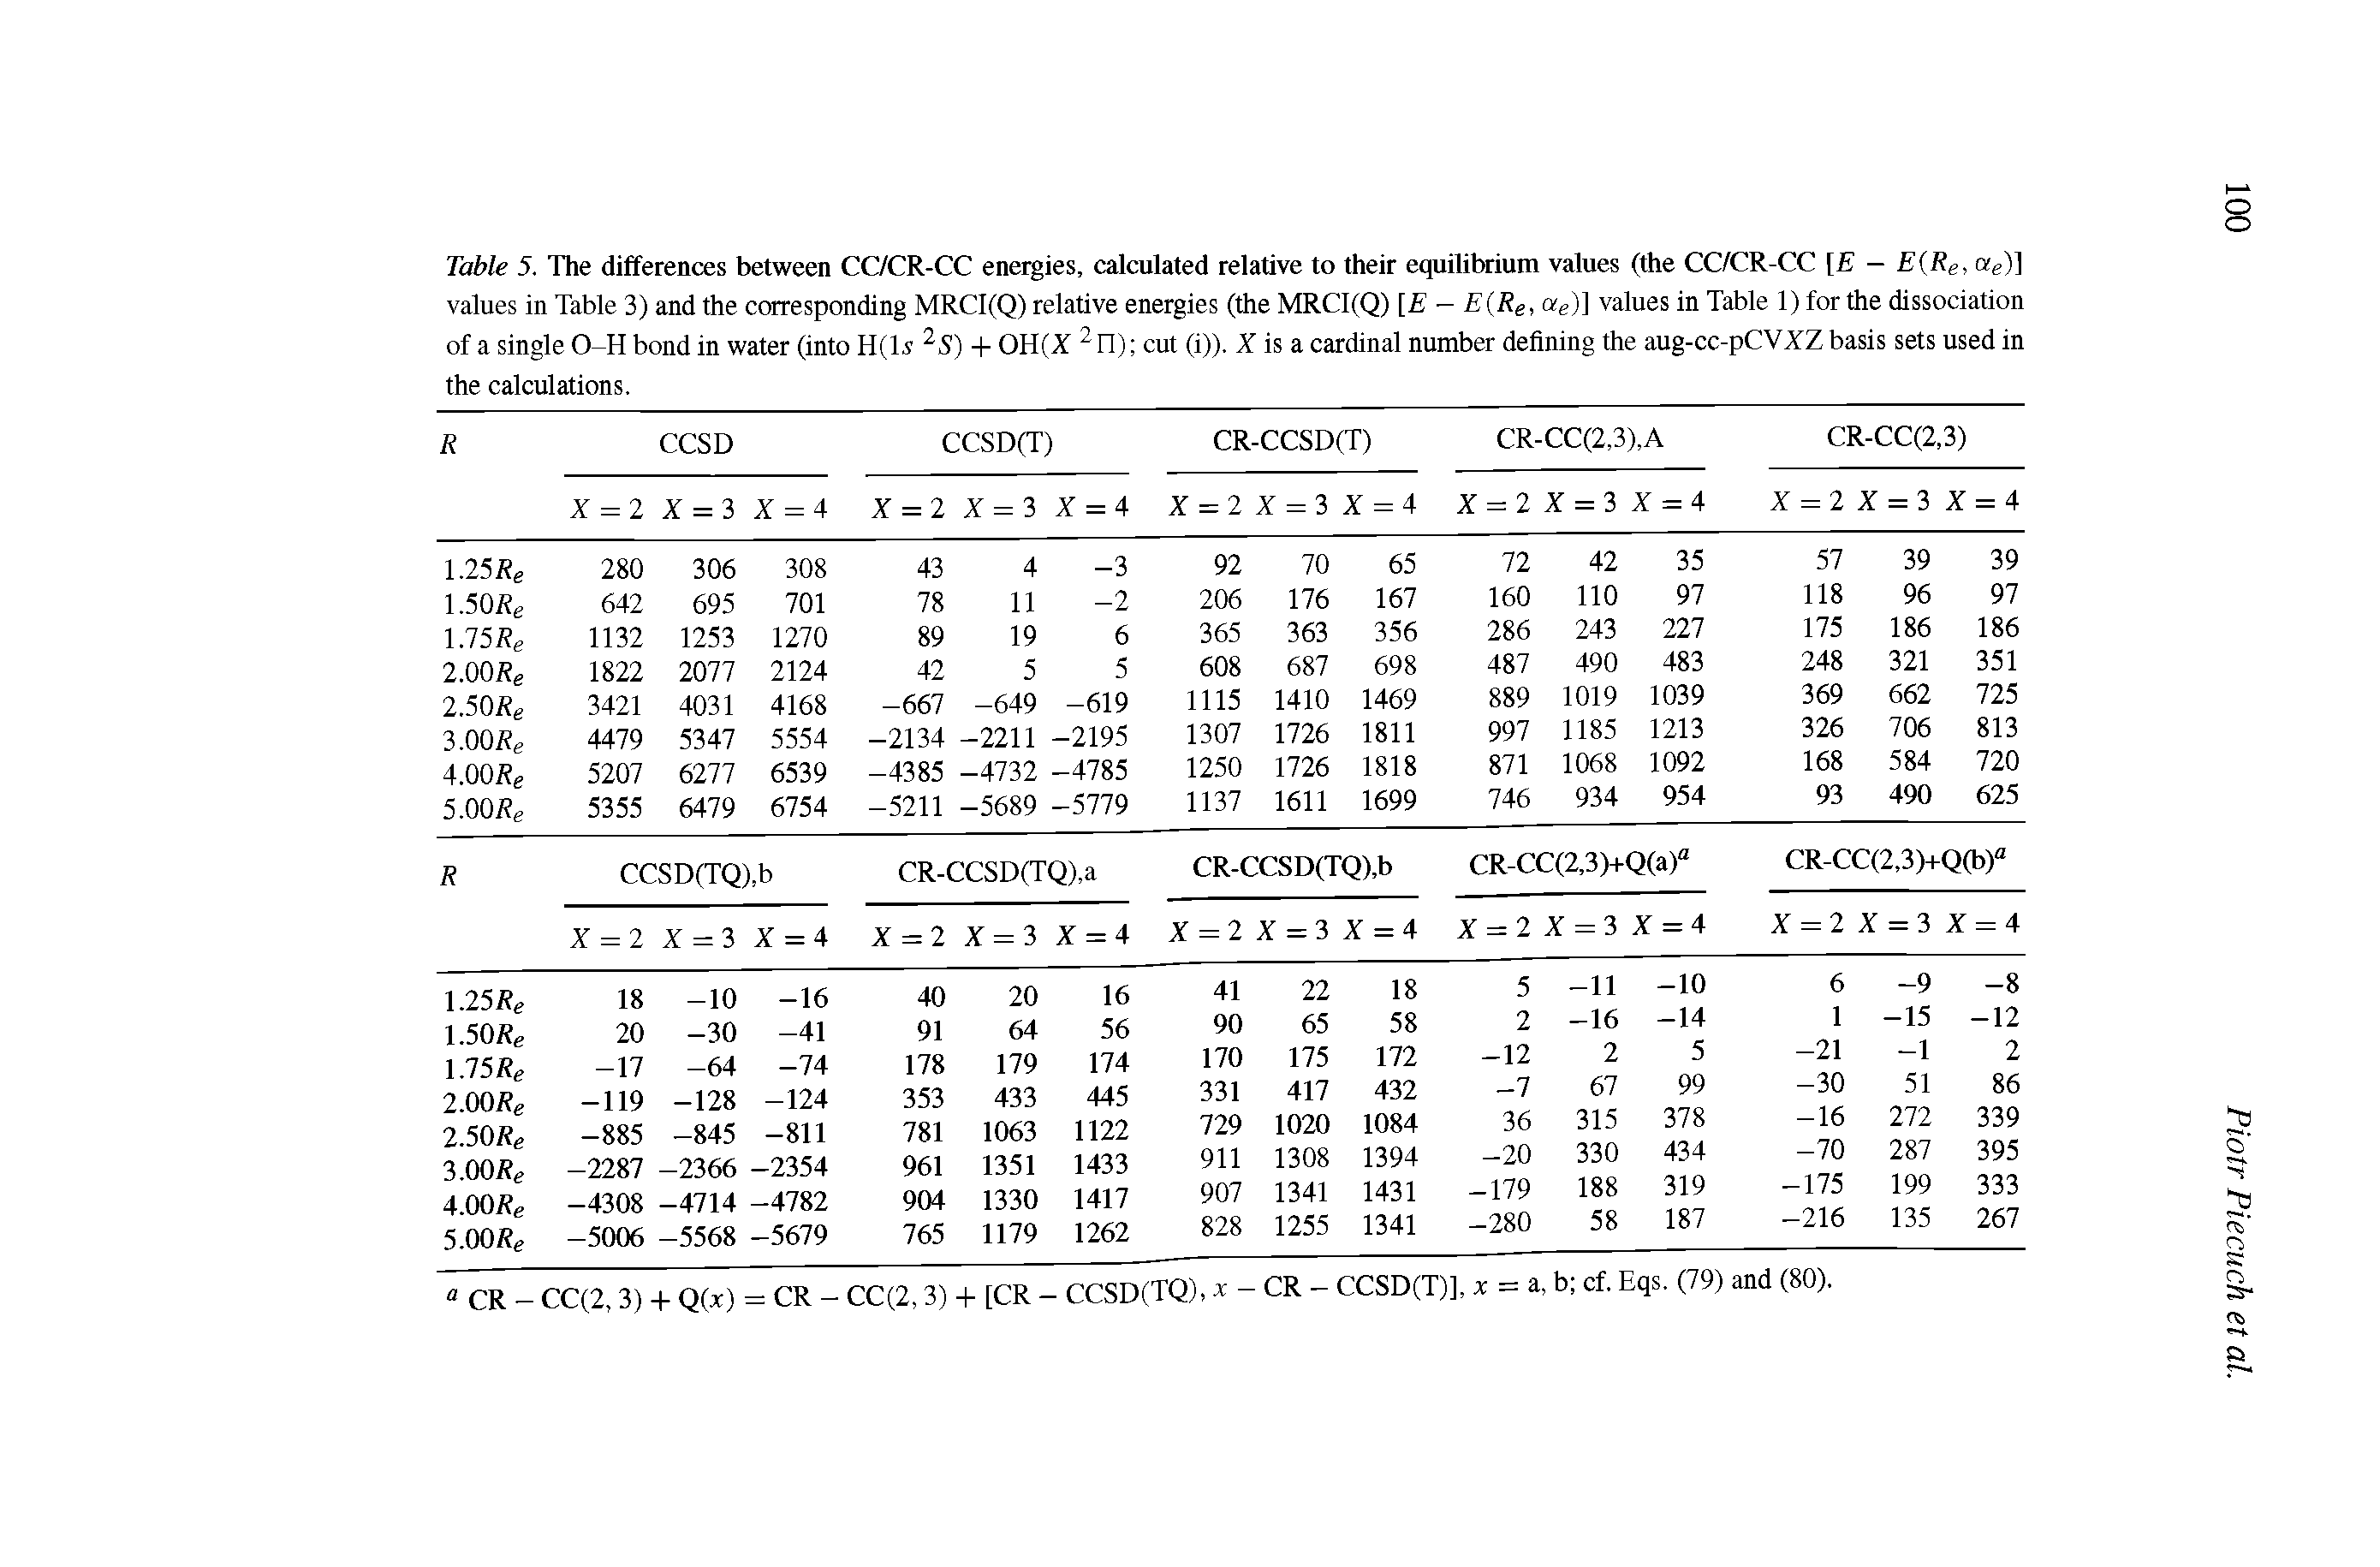 Table 5. The differences between CC/CR-CC energies, calculated relative to their equilibrium values (the CC/CR-CC E - E(Re, ore)] values in Table 3) and the corresponding MRCI(Q) relative energies (the MRCI(Q) [E — E(Re, ae)] values in Table 1) for the dissociation of a single O-H bond in water (into H(l.s 2S) 4- OH(X 2 n) cut (i)). X is a cardinal number defining the aug-cc-pCVXZ basis sets used in the calculations.